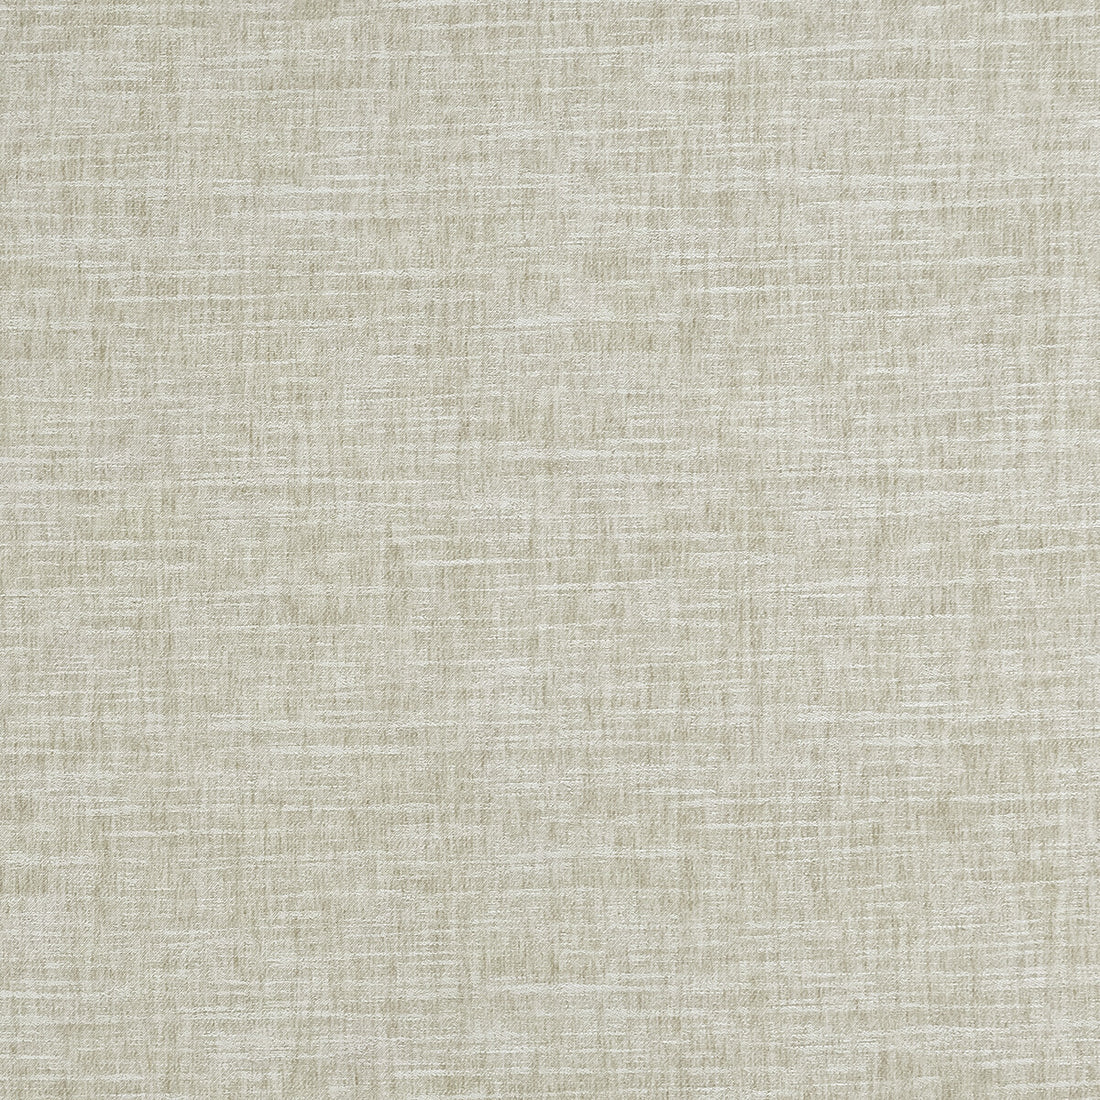 Mizo fabric in ivory/linen color - pattern F1444/02.CAC.0 - by Clarke And Clarke in the Clarke &amp; Clarke Origins collection